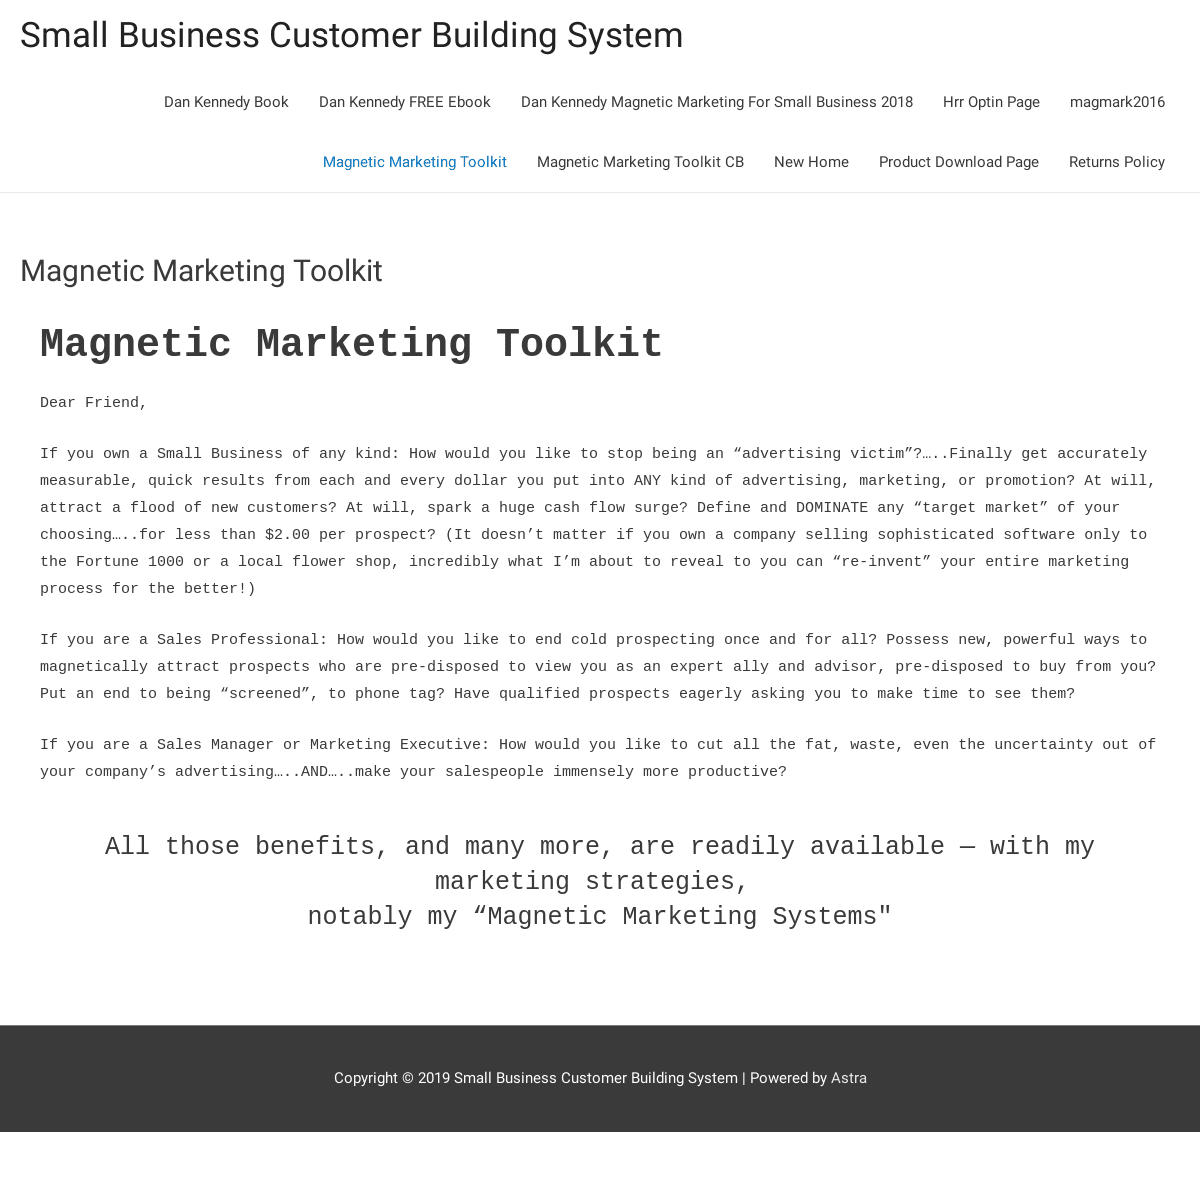 Small Business Customer Building System